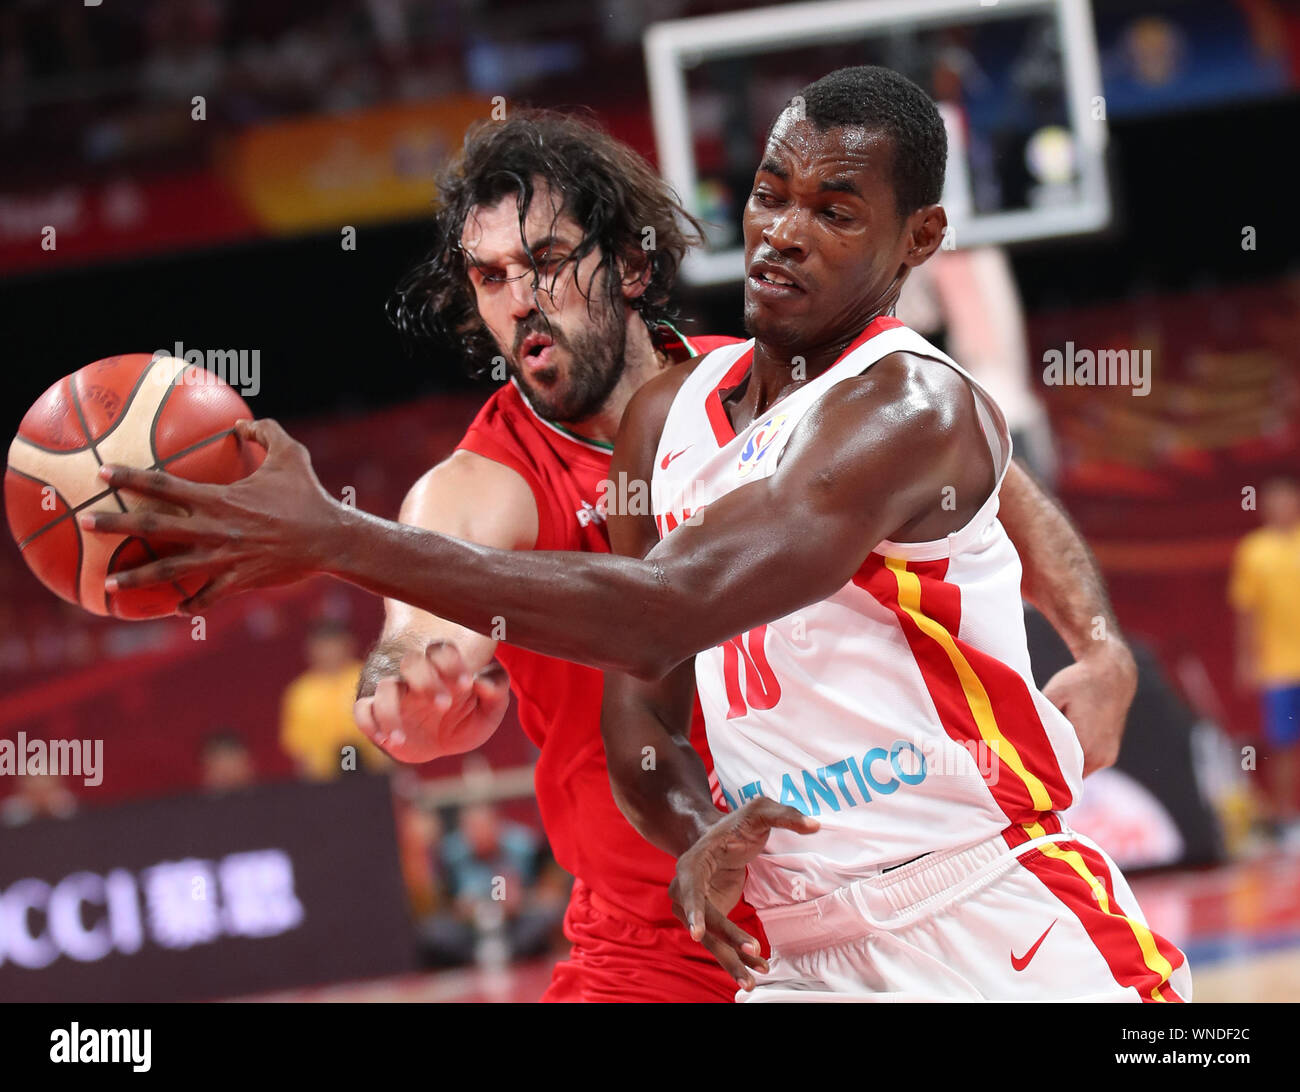 Beijing, China. 6th Sep, 2019. Jose Antonio (R) of Angola grabs the ball during the group N match between Iran and Angola at the 2019 FIBA World Cup in Beijing, capital of China, Sept. 6, 2019. Credit: Meng Yongmin/Xinhua/Alamy Live News Stock Photo